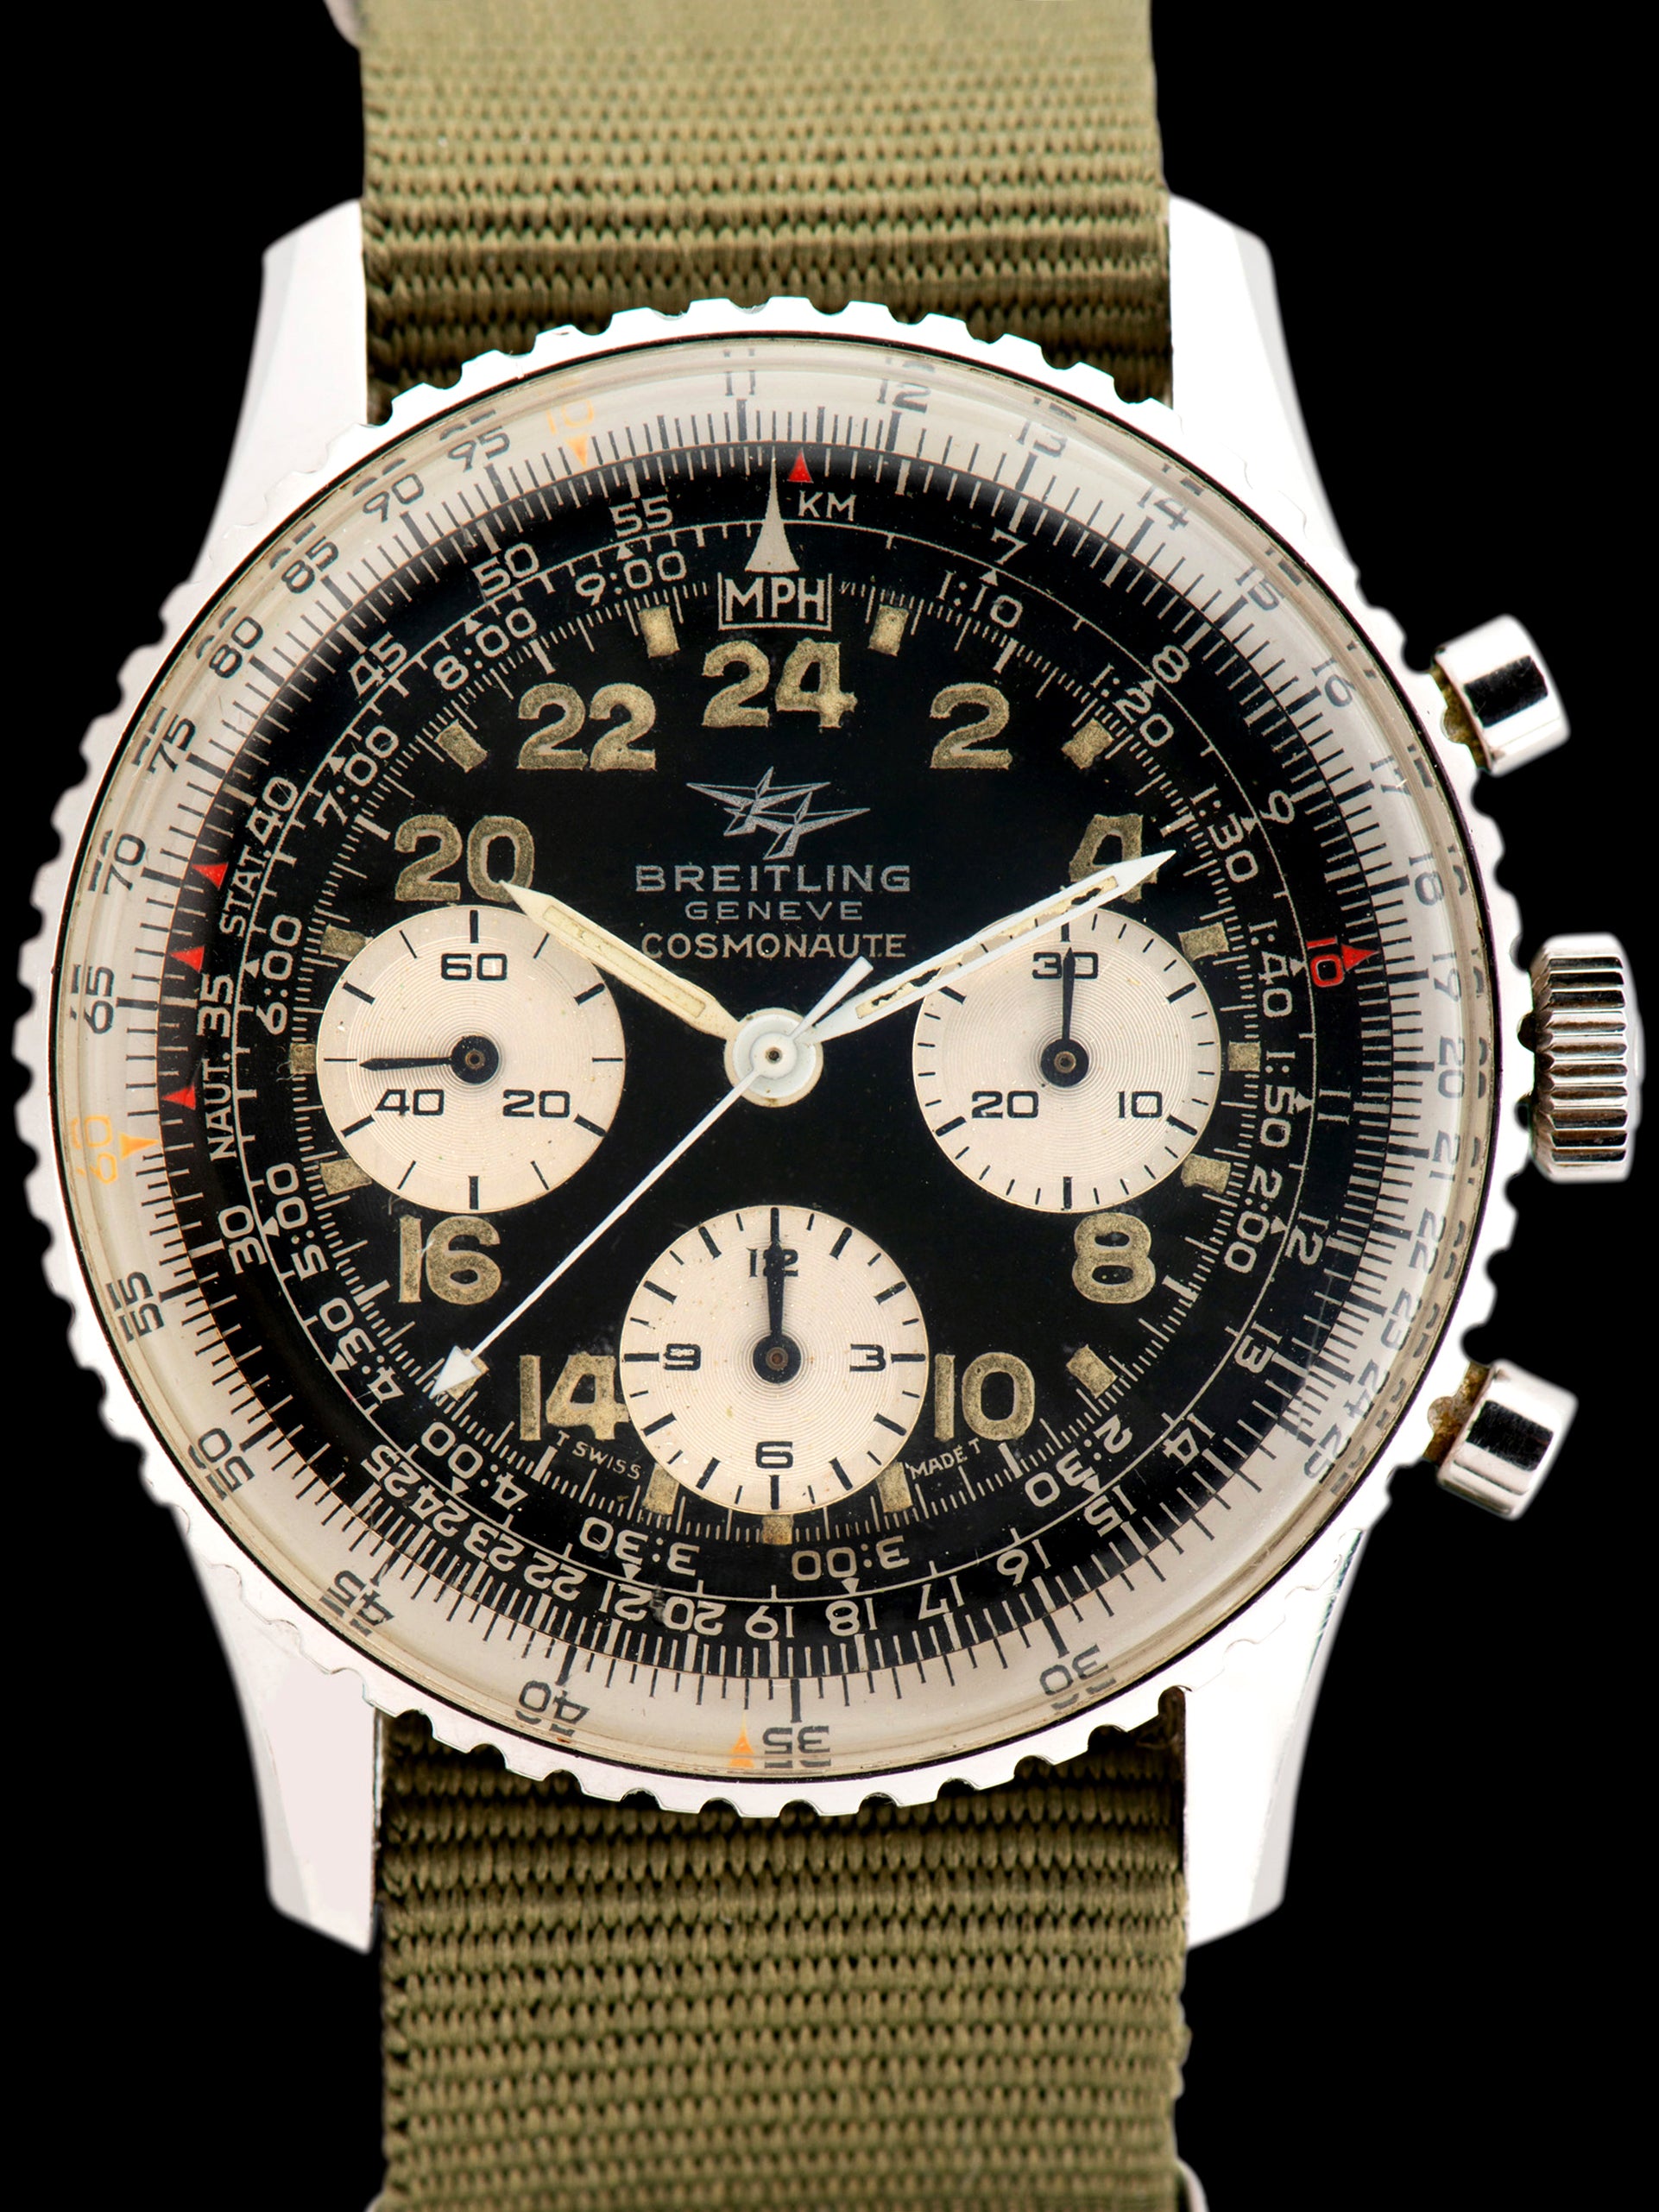 1969 Breitling Cosmonaute (Ref. 809) "Twin Jets" W/ Booklet & Letter From Air Canada Pilot Original Owner